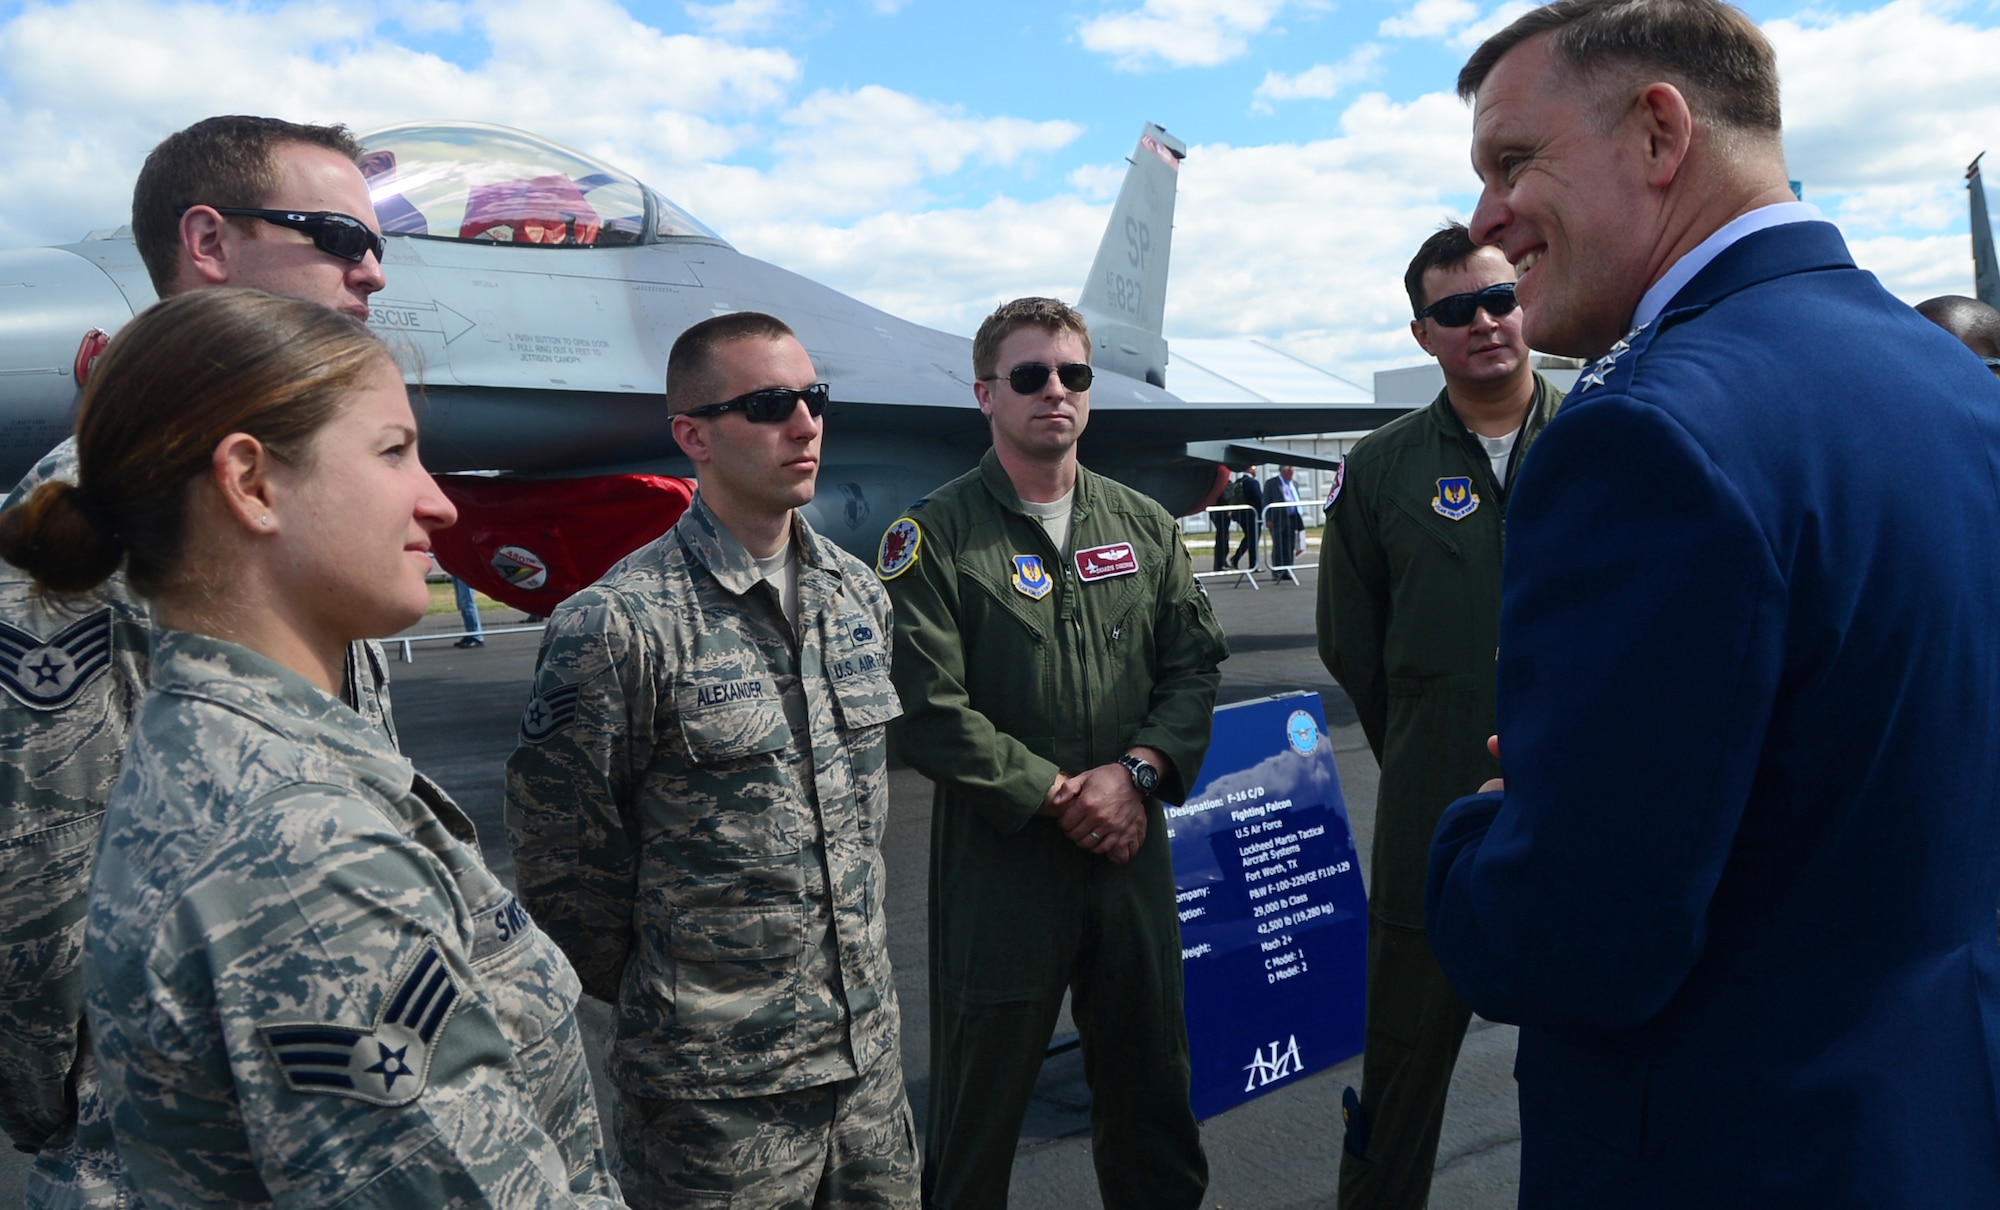 Gen. Frank Gorenc speaks with Airmen during a static display tour July 14, 2014, at the Farnborough International Airshow in England. Participation in FIA highlights the strength of the U.S. commitment to the security of NATO, the strong alliance with the U.K., and demonstrates interoperability with allies and the defense industry state-of-the-art capabilities. Gorenc is the the U.S. Air Forces in Europe-Air Forces Africa and Allied Air Command commander. (U.S. Air Force photo/Airman 1st Class Erin O'Shea)